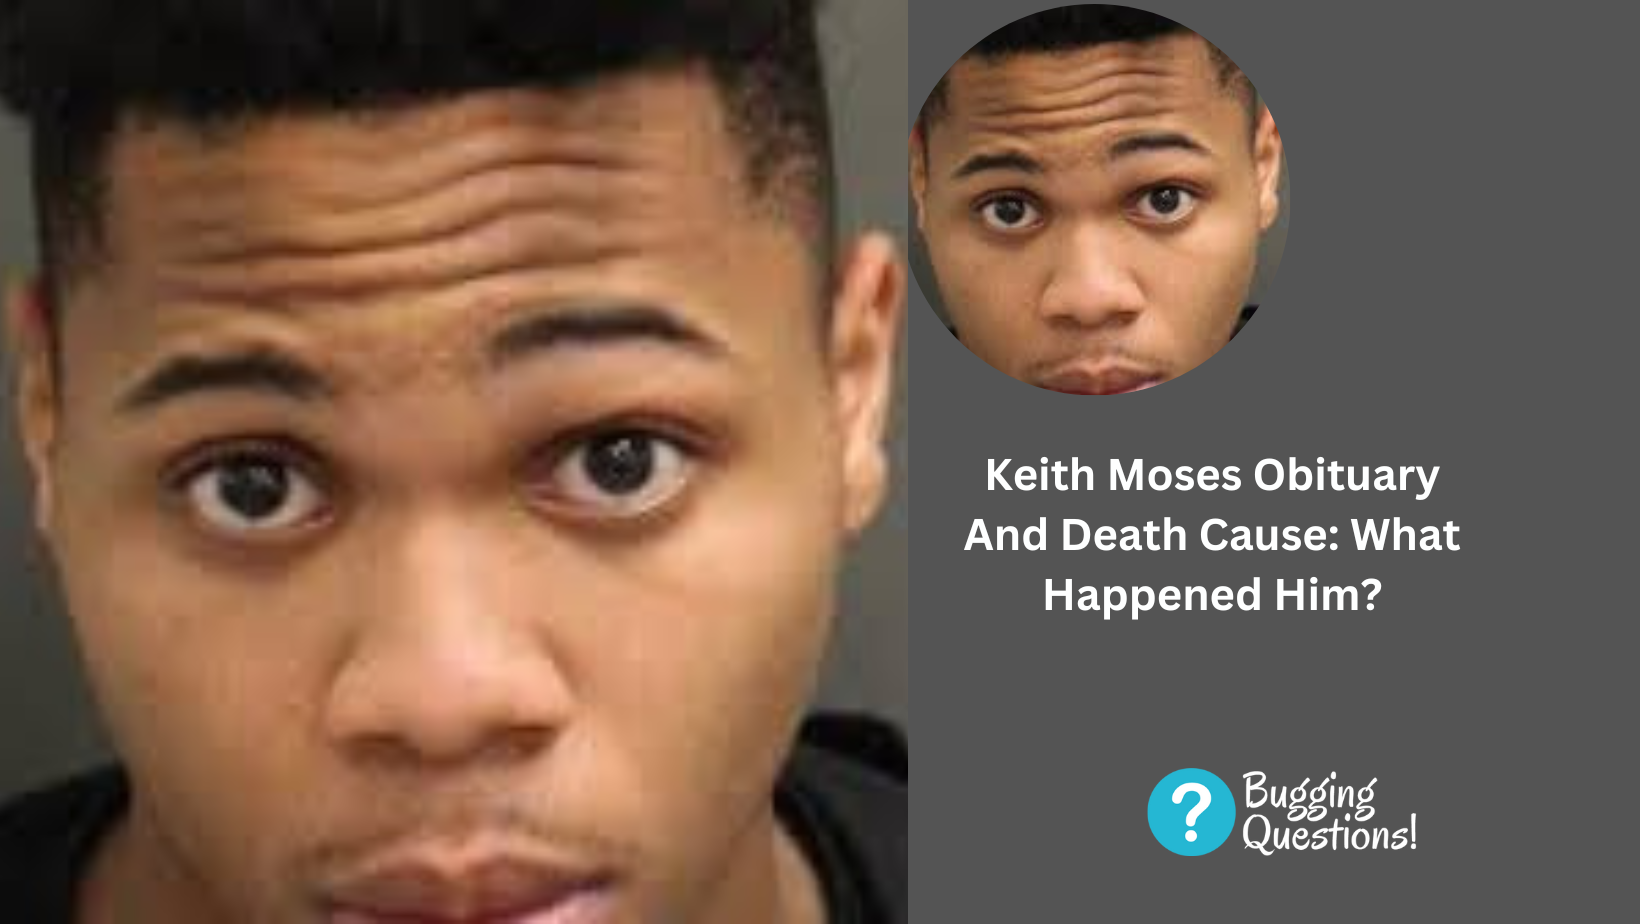 Keith Moses Obituary And Death Cause: What Happened Him? Age And Parents Explored